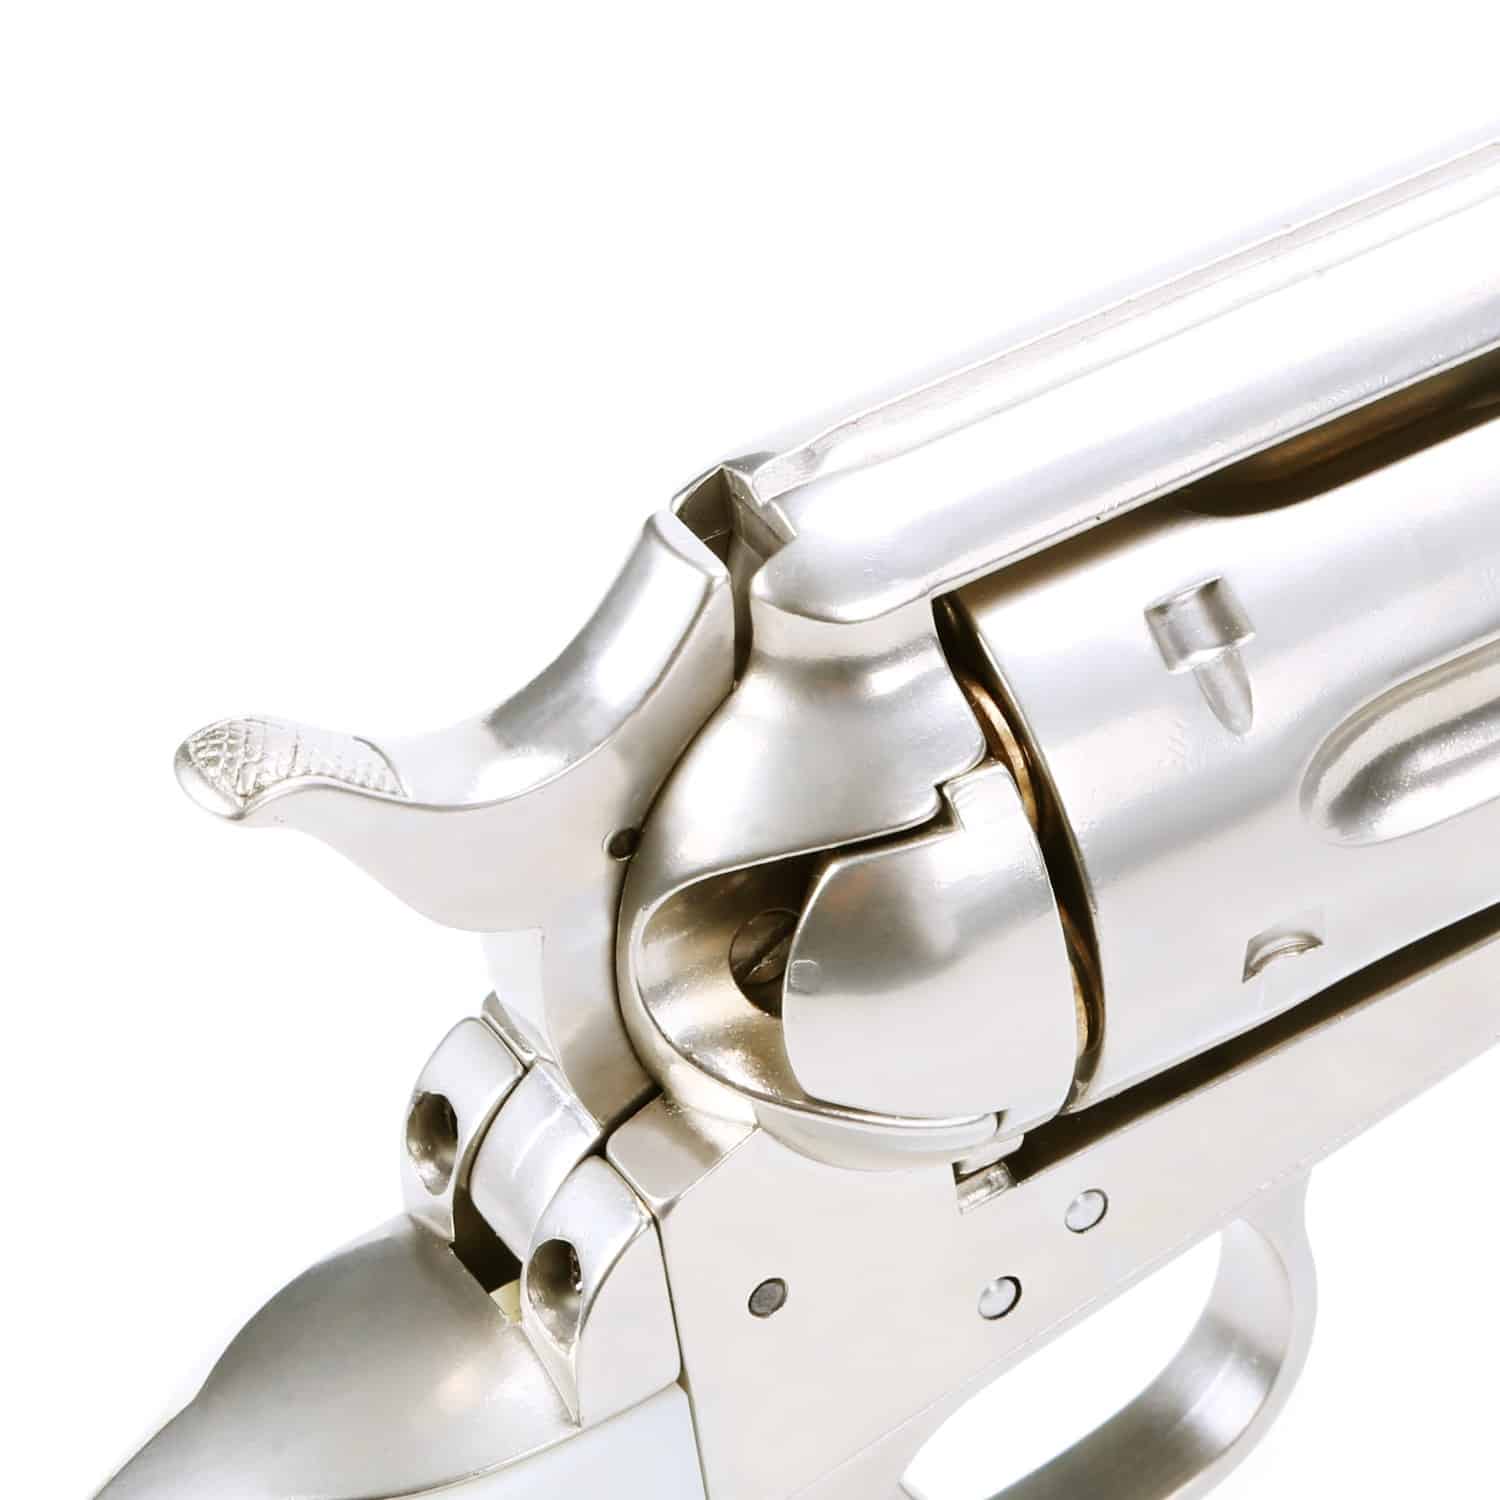 King Arms SAA .45 Peacemaker Revolver S - Silver